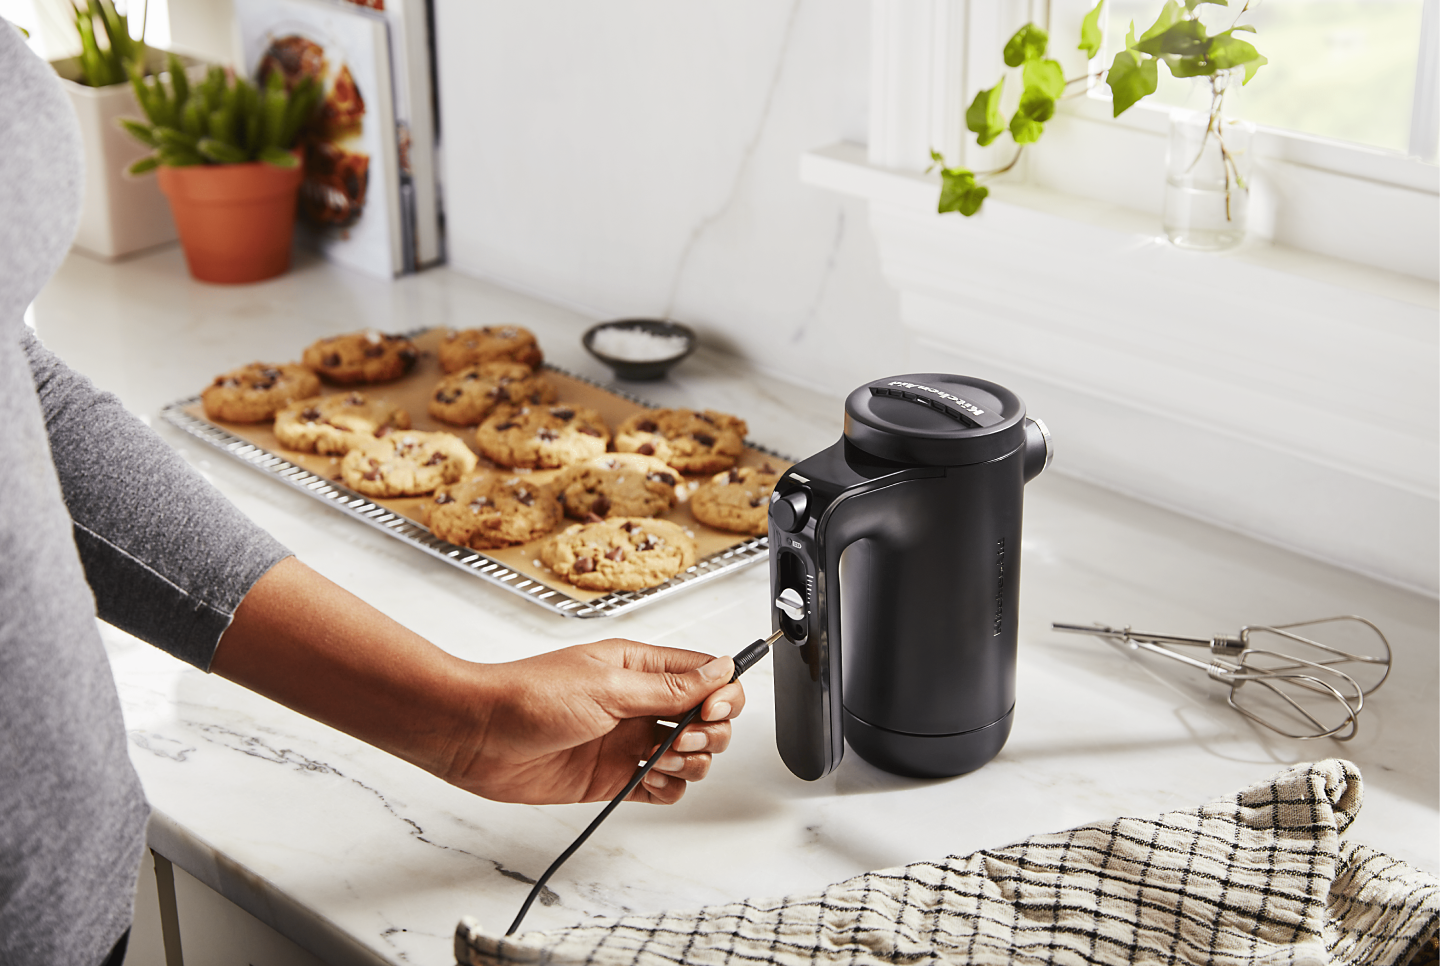 Maker plugging cord into black KitchenAid® hand mixer on countertop next to tray of chocolate chip cookies